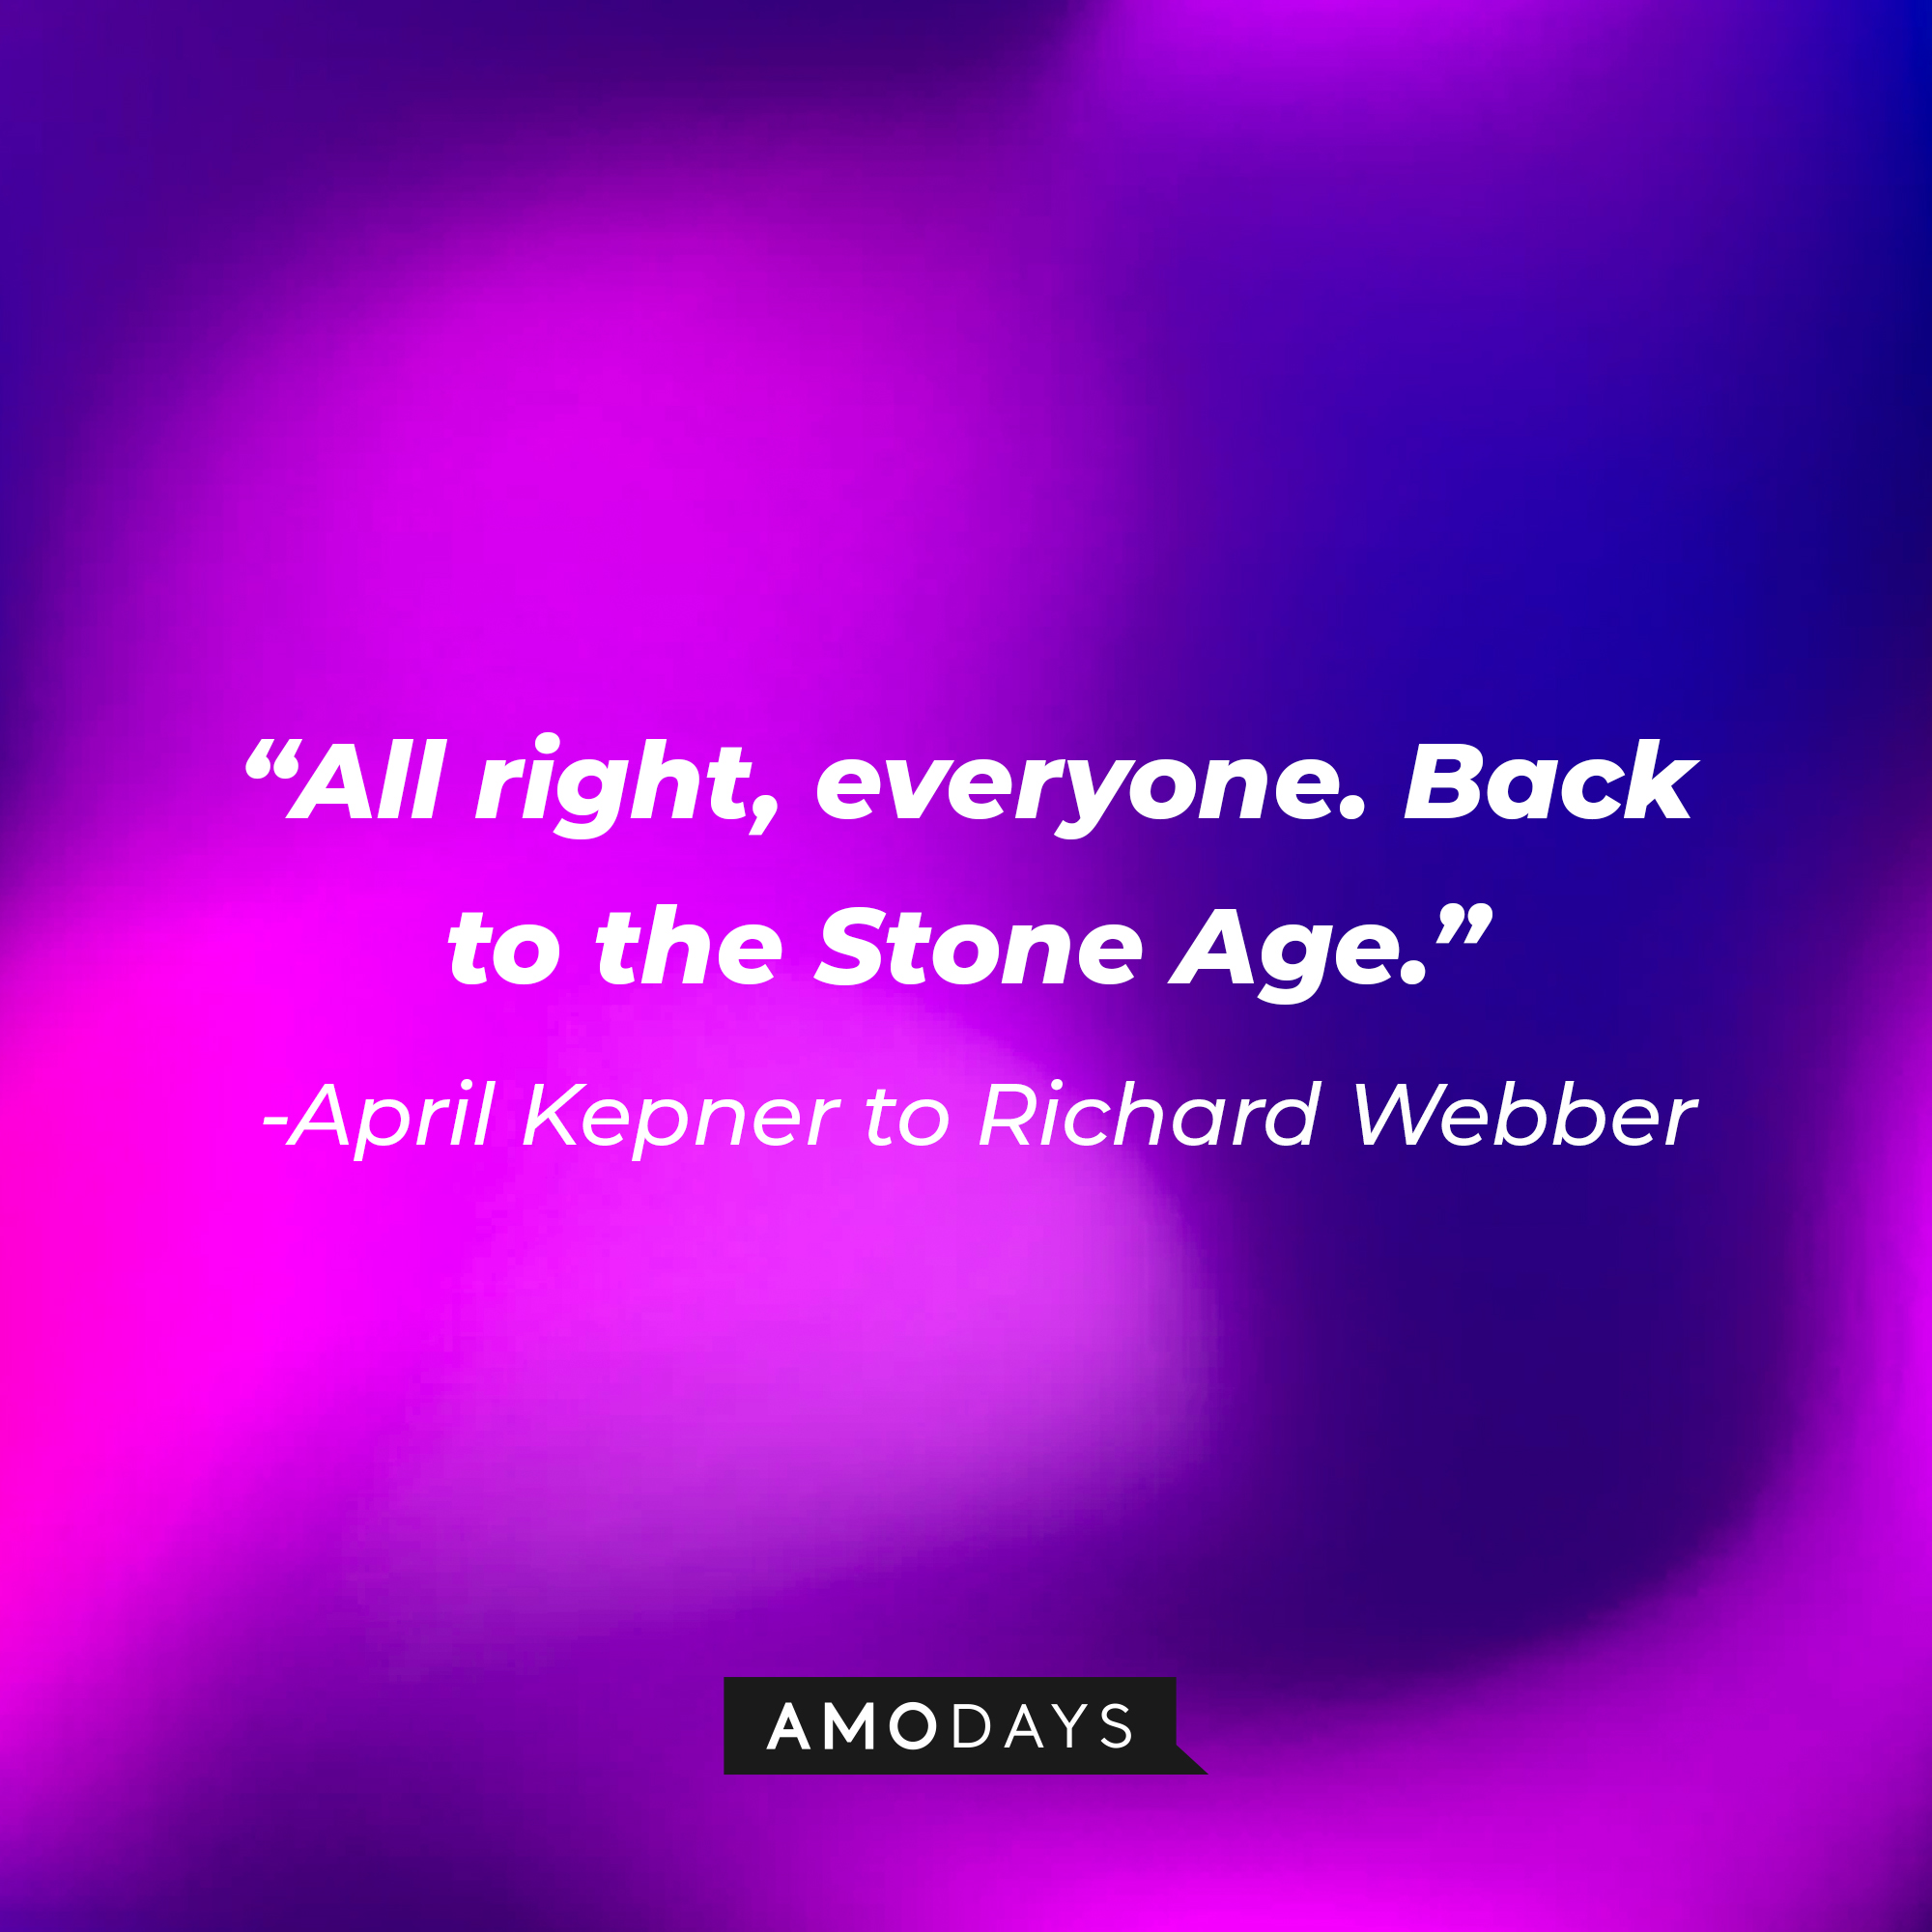 A quote from April Kepner to Richard Webber "All right, everyone. Back to the Stone Age." | Source: AmoDays